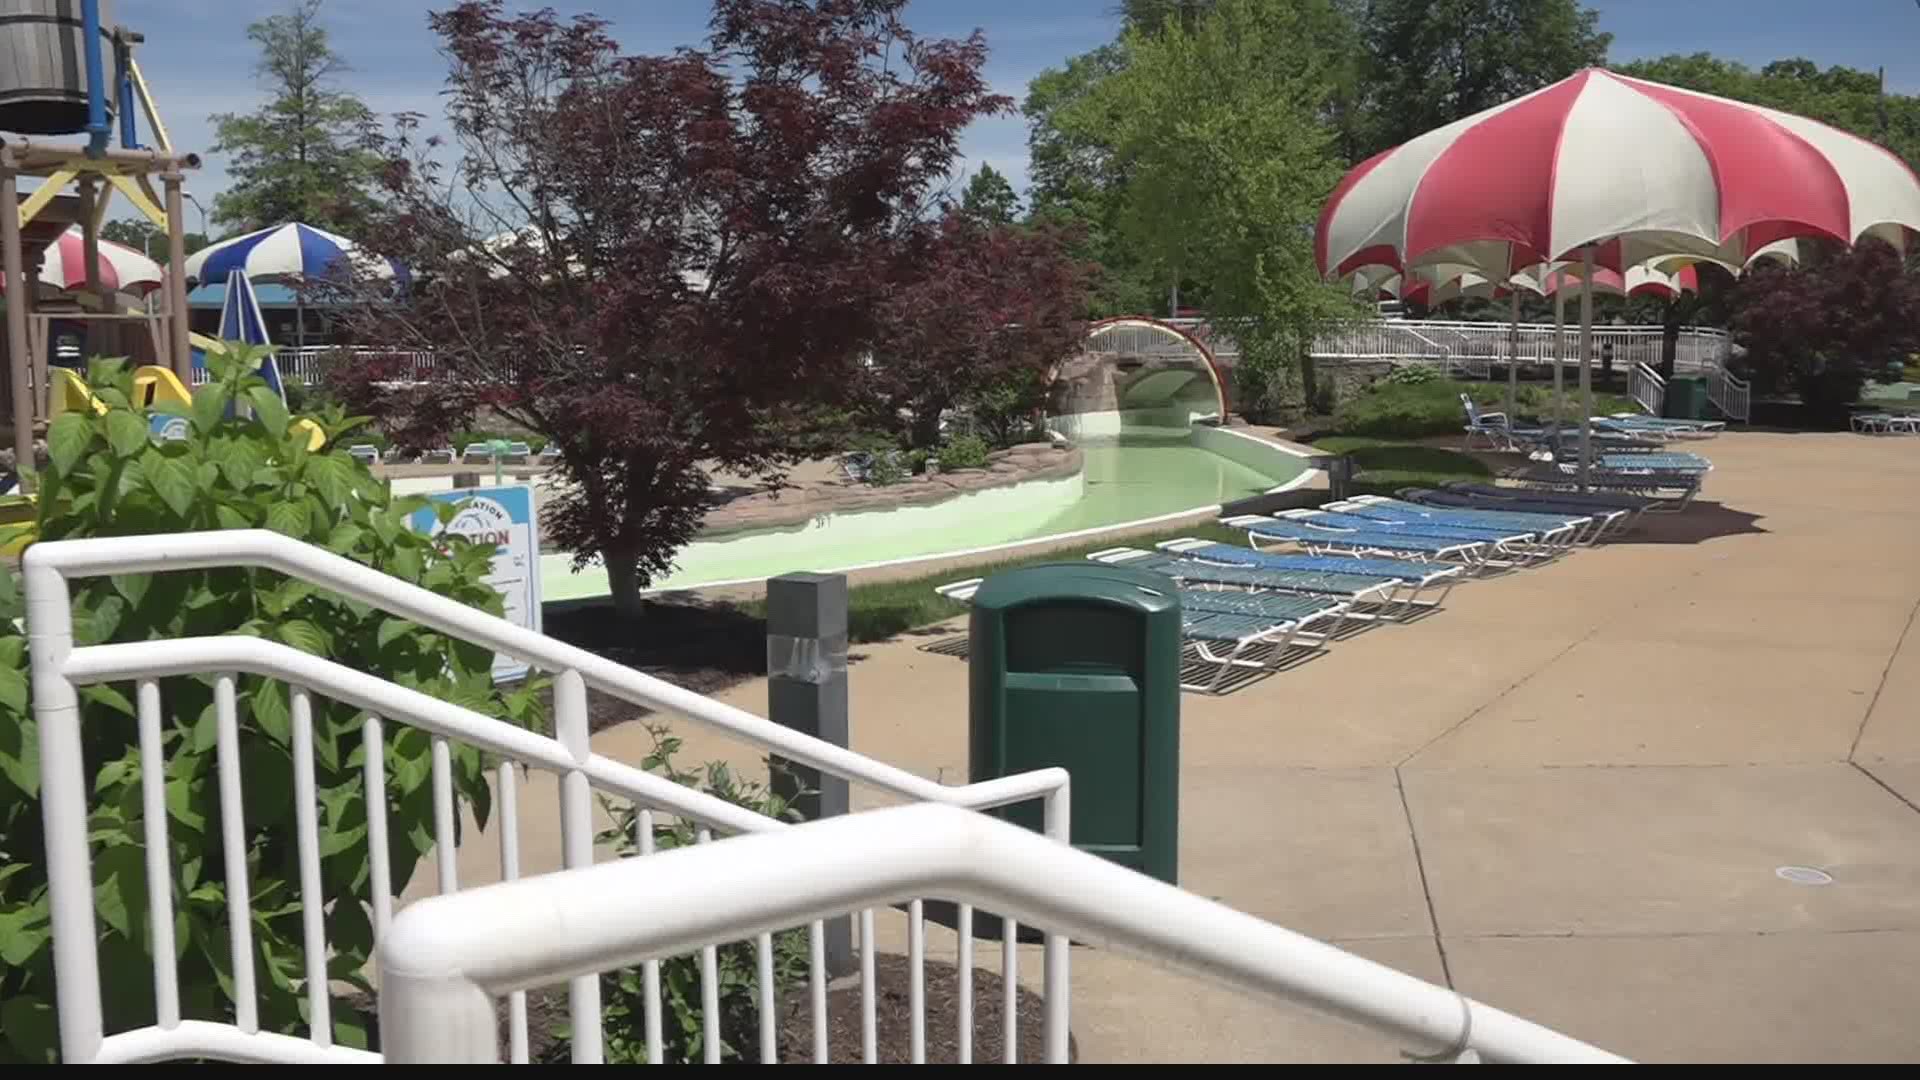 Some pools across the area will open as scheduled while others will remain closed throughout the  summer